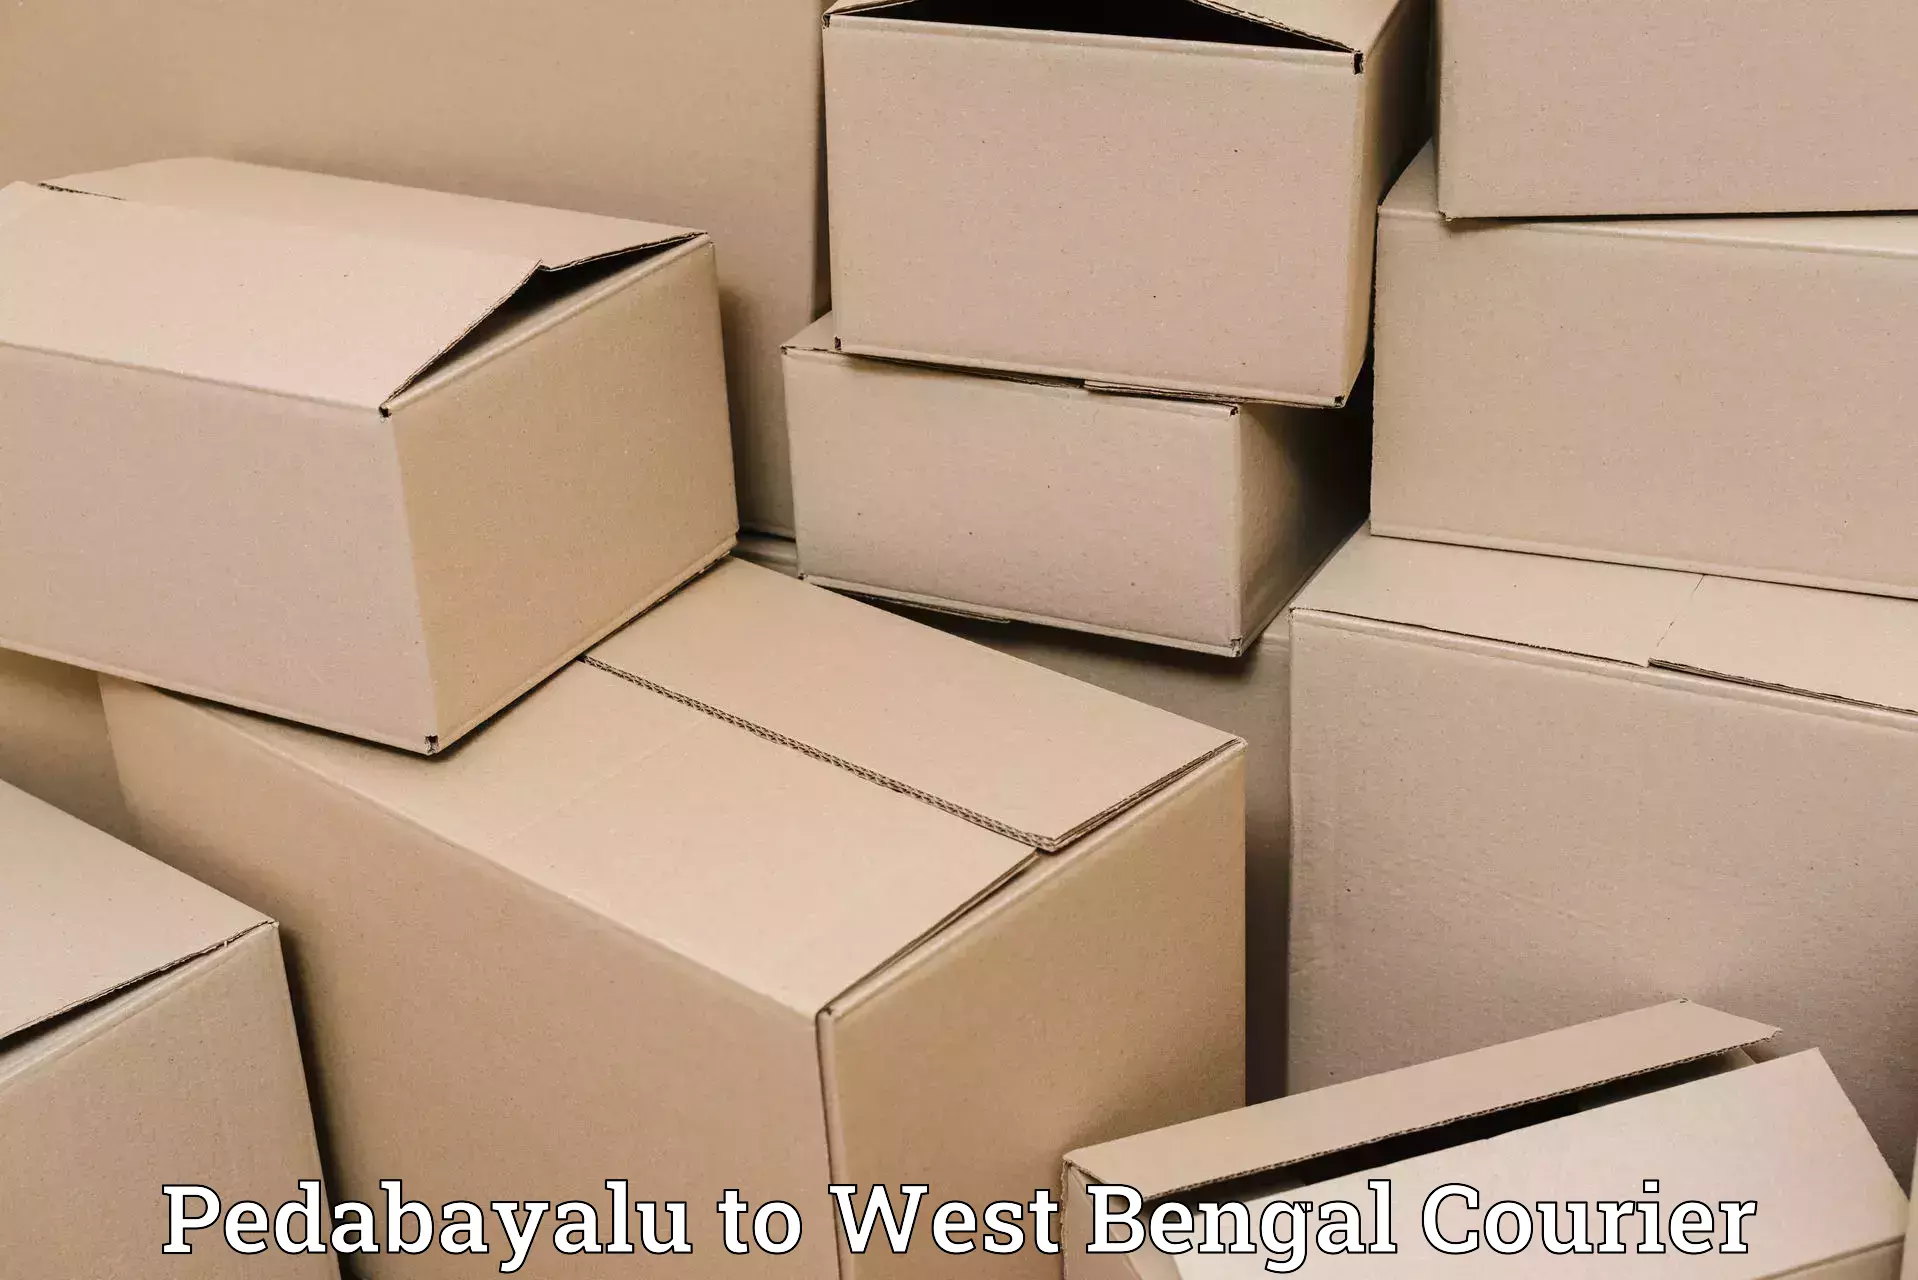 Speedy delivery service Pedabayalu to West Bengal